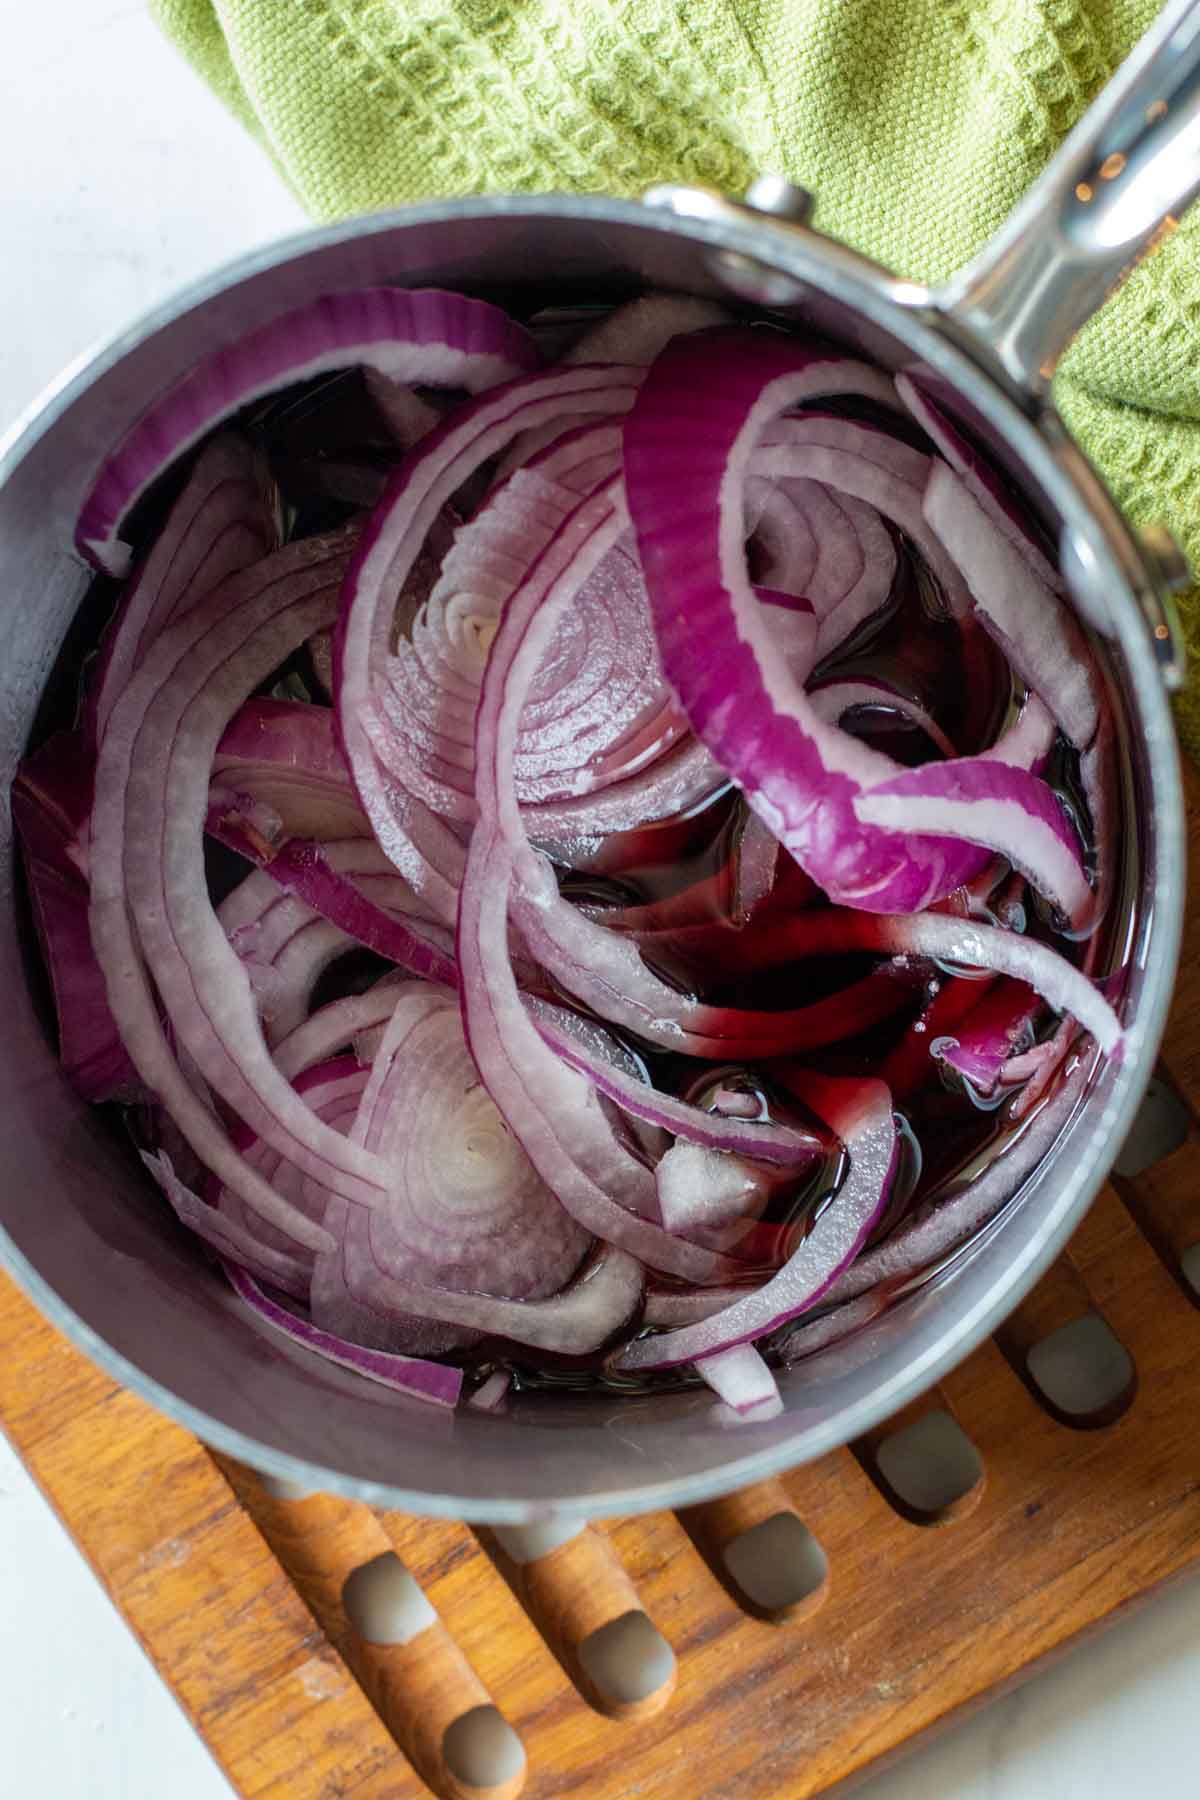 Cooking red onions in wine to make red onion marmalade.